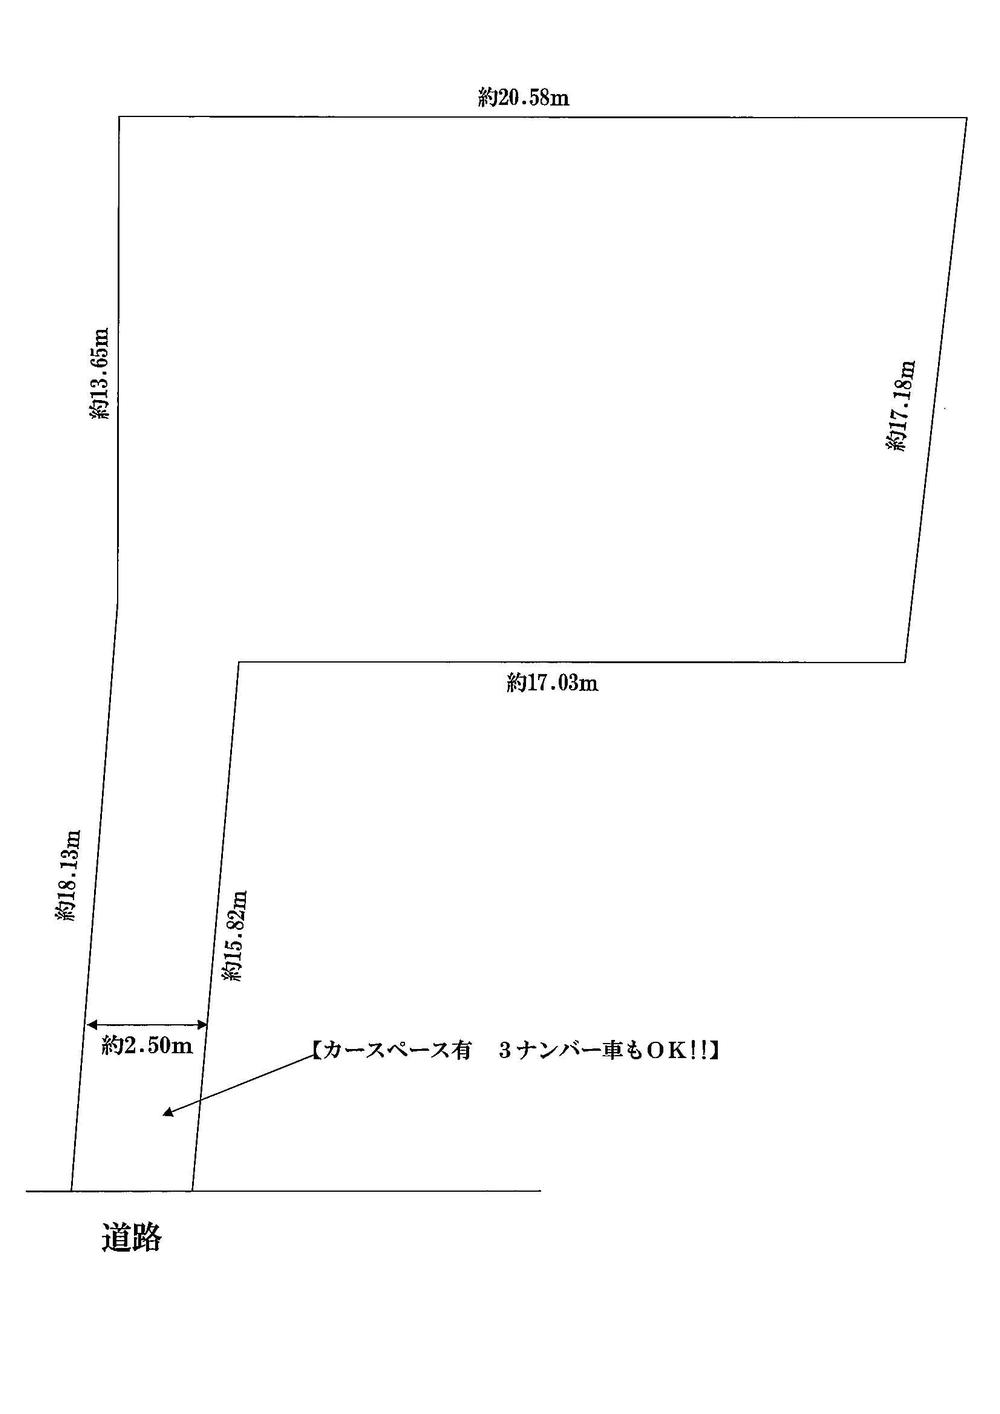 Compartment figure. Land price 63 million yen, There land area 367.83 sq m car space (3 number cars possible)